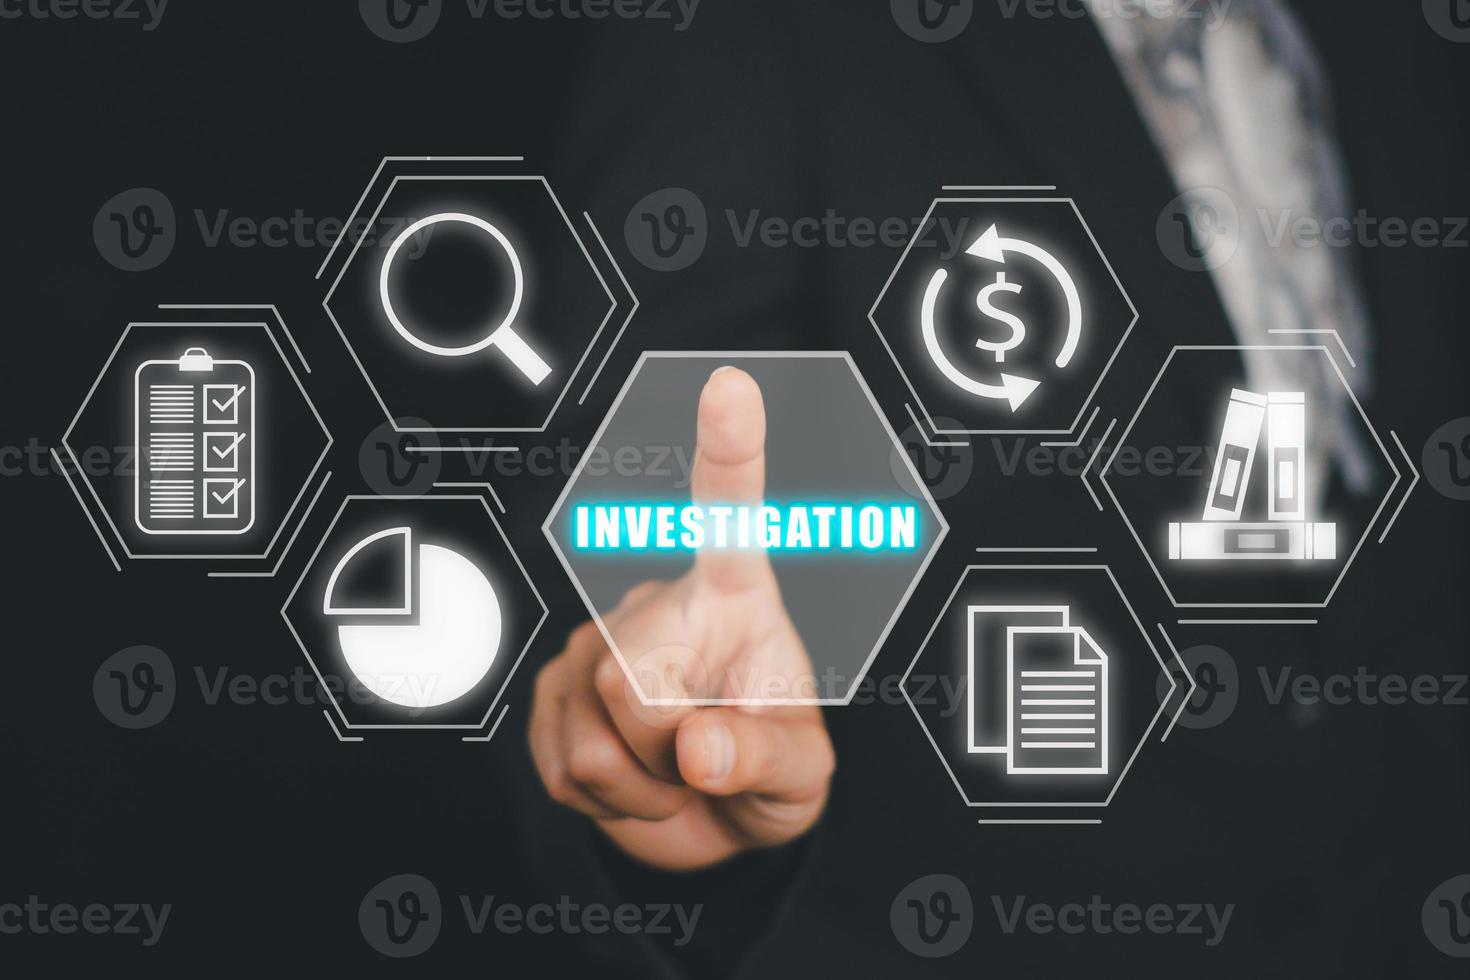 Investigation inspection audit business concept, Business person hand touching investigation icon on virtual screen, Business, internet, technology. photo